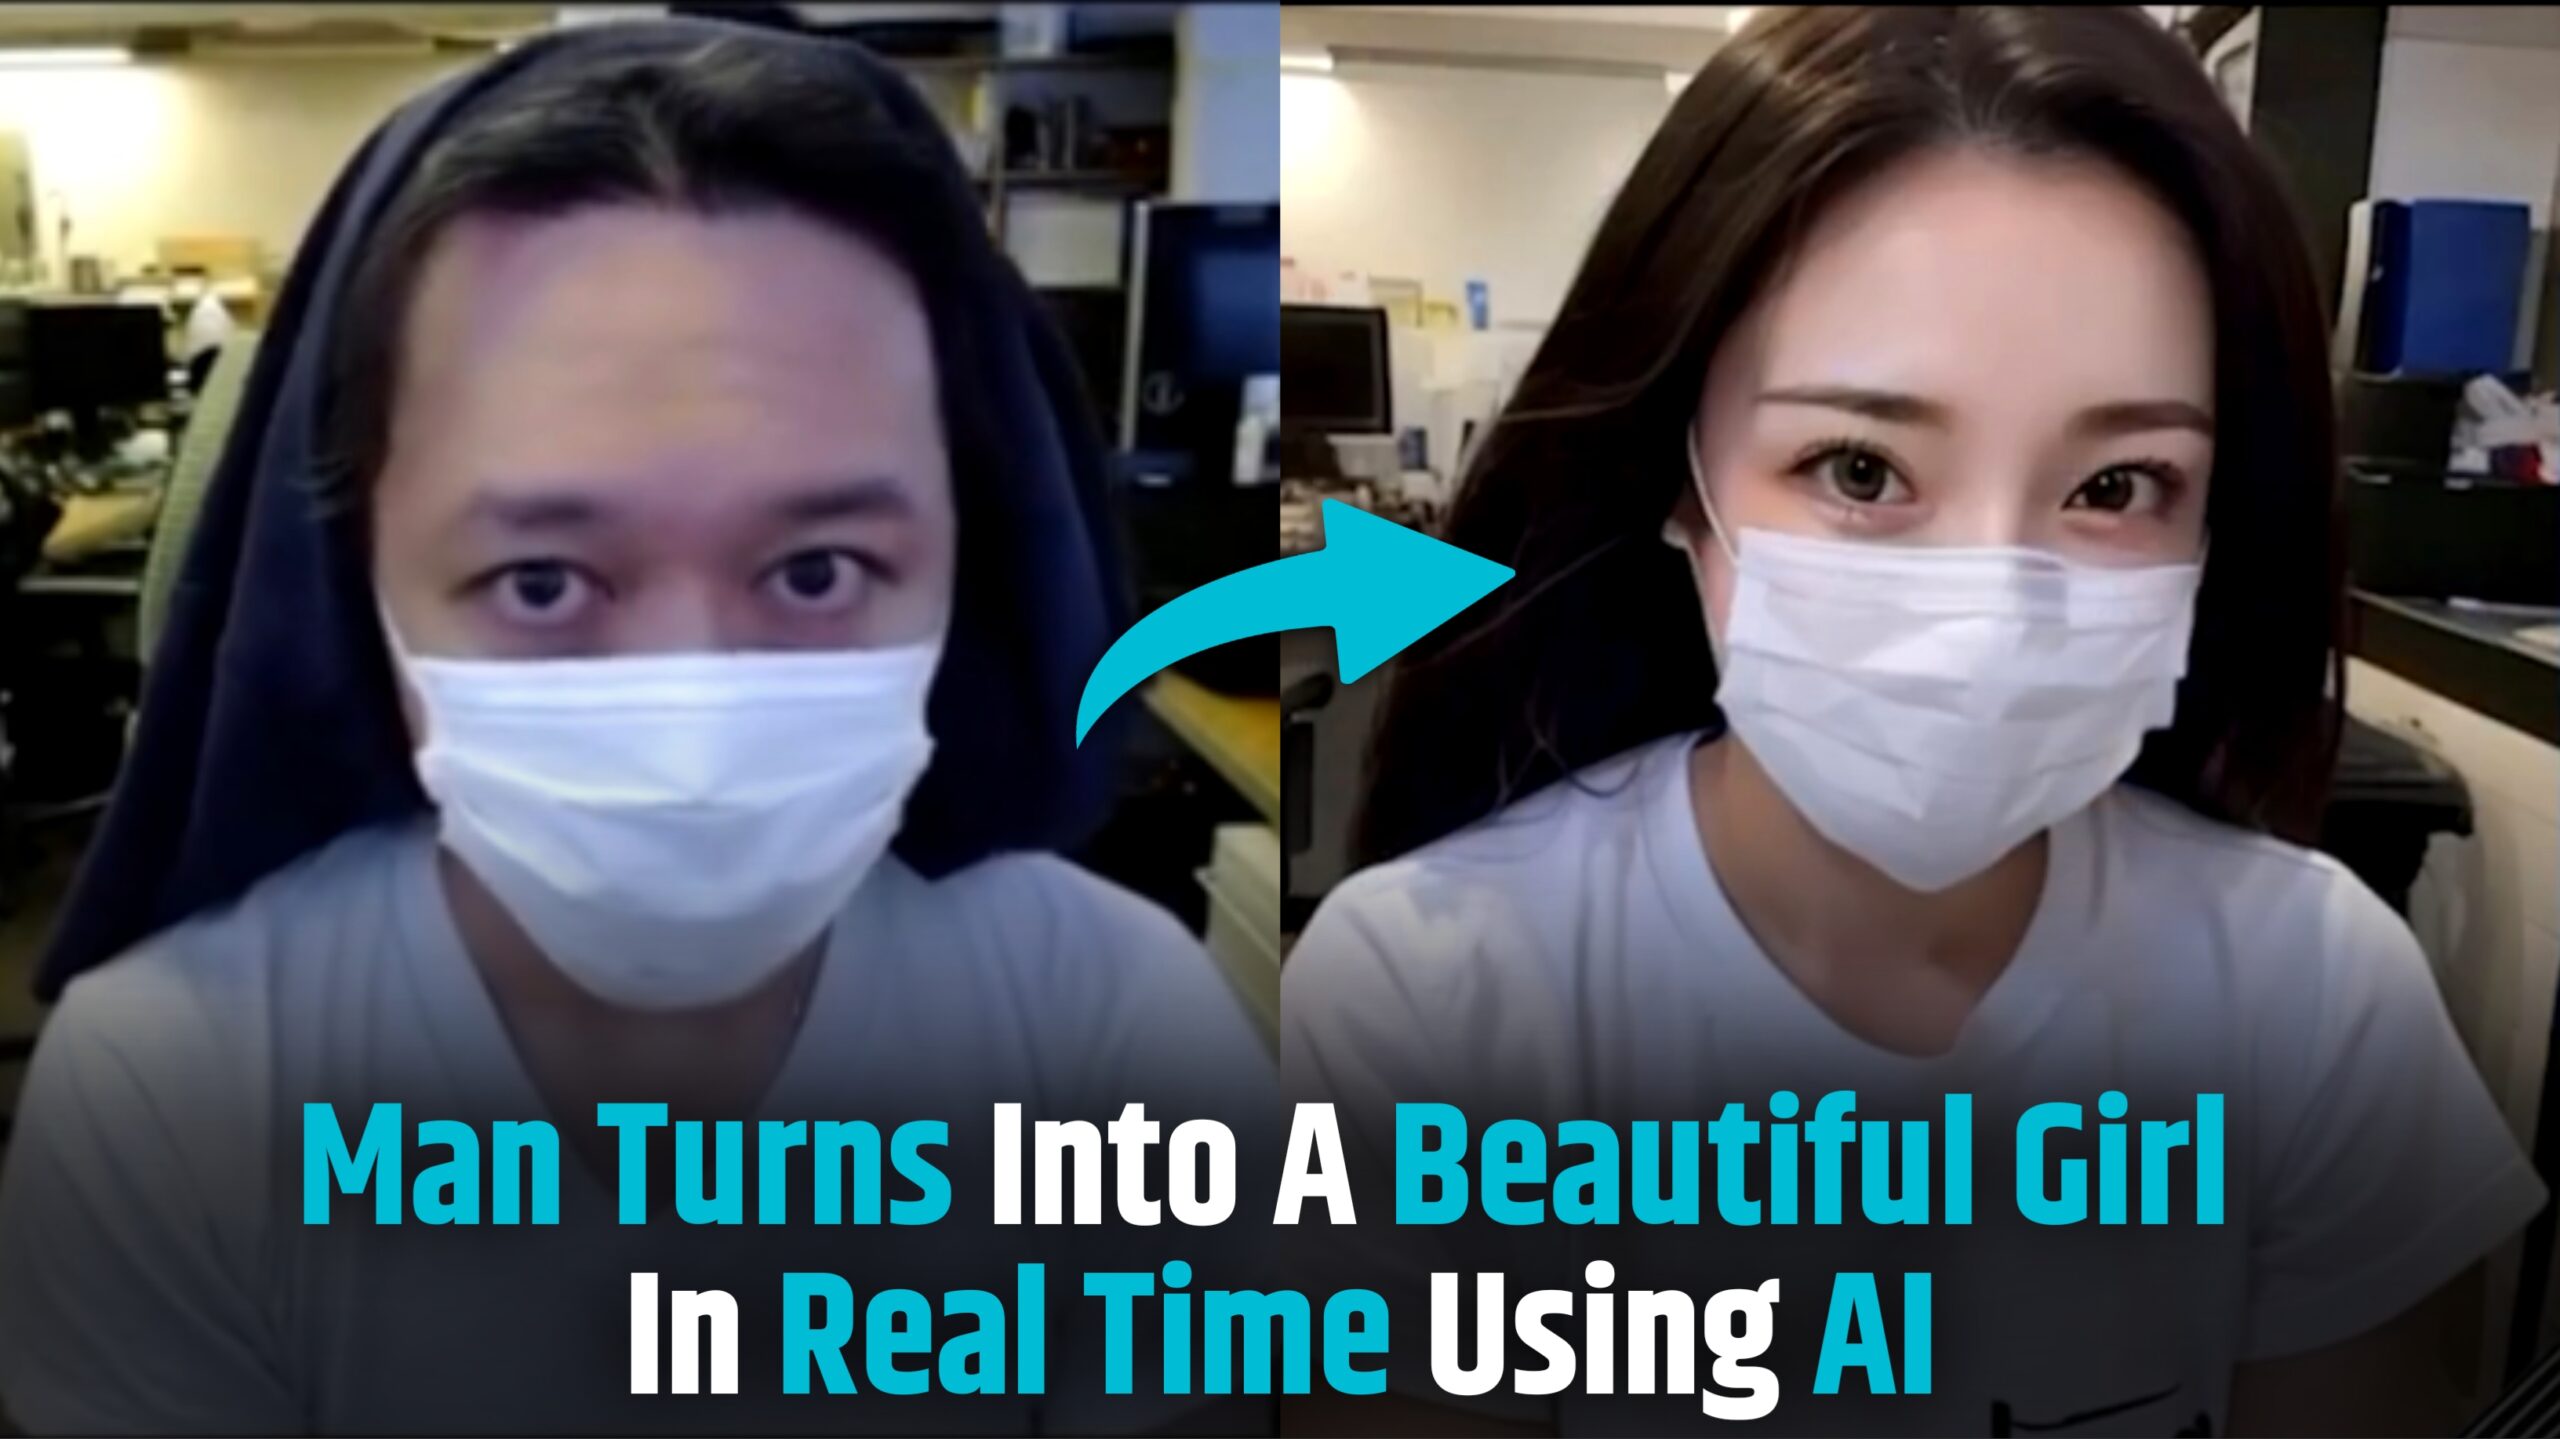 Man Turns Into A Beautiful Girl In Real Time Using AI